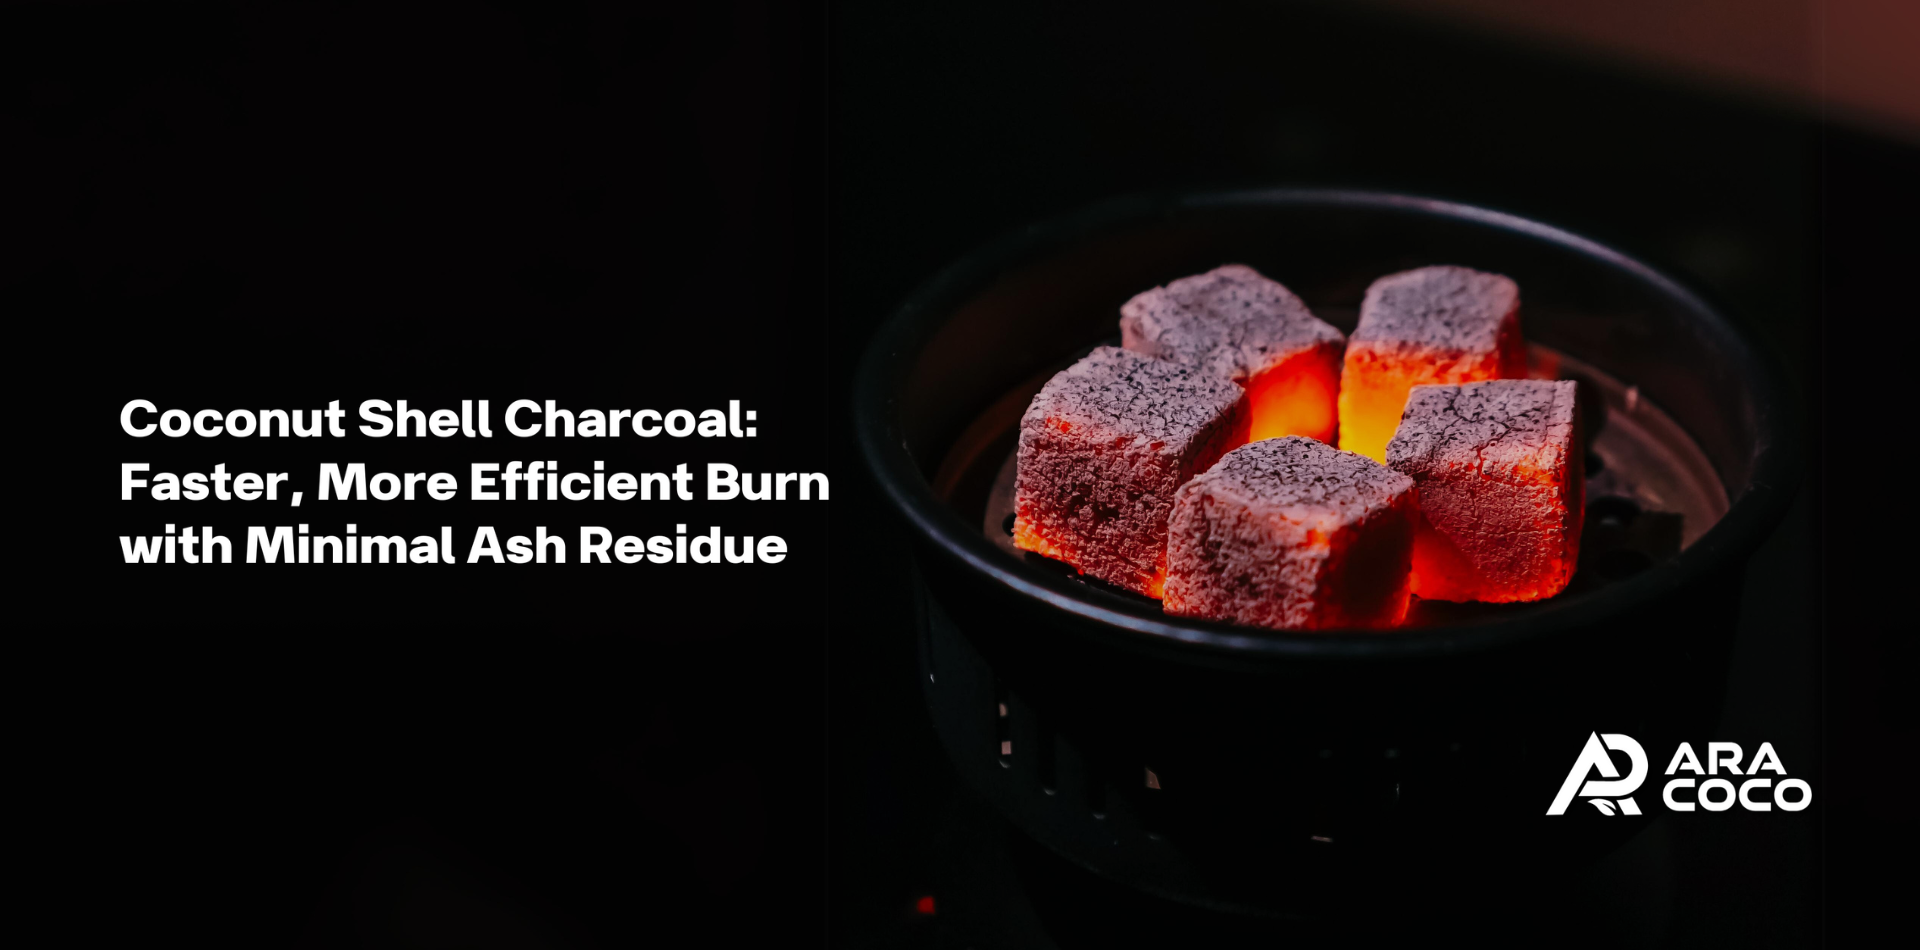 Coconut Shell Charcoal:  Faster, More Efficient Burn with Minimal Ash Residue